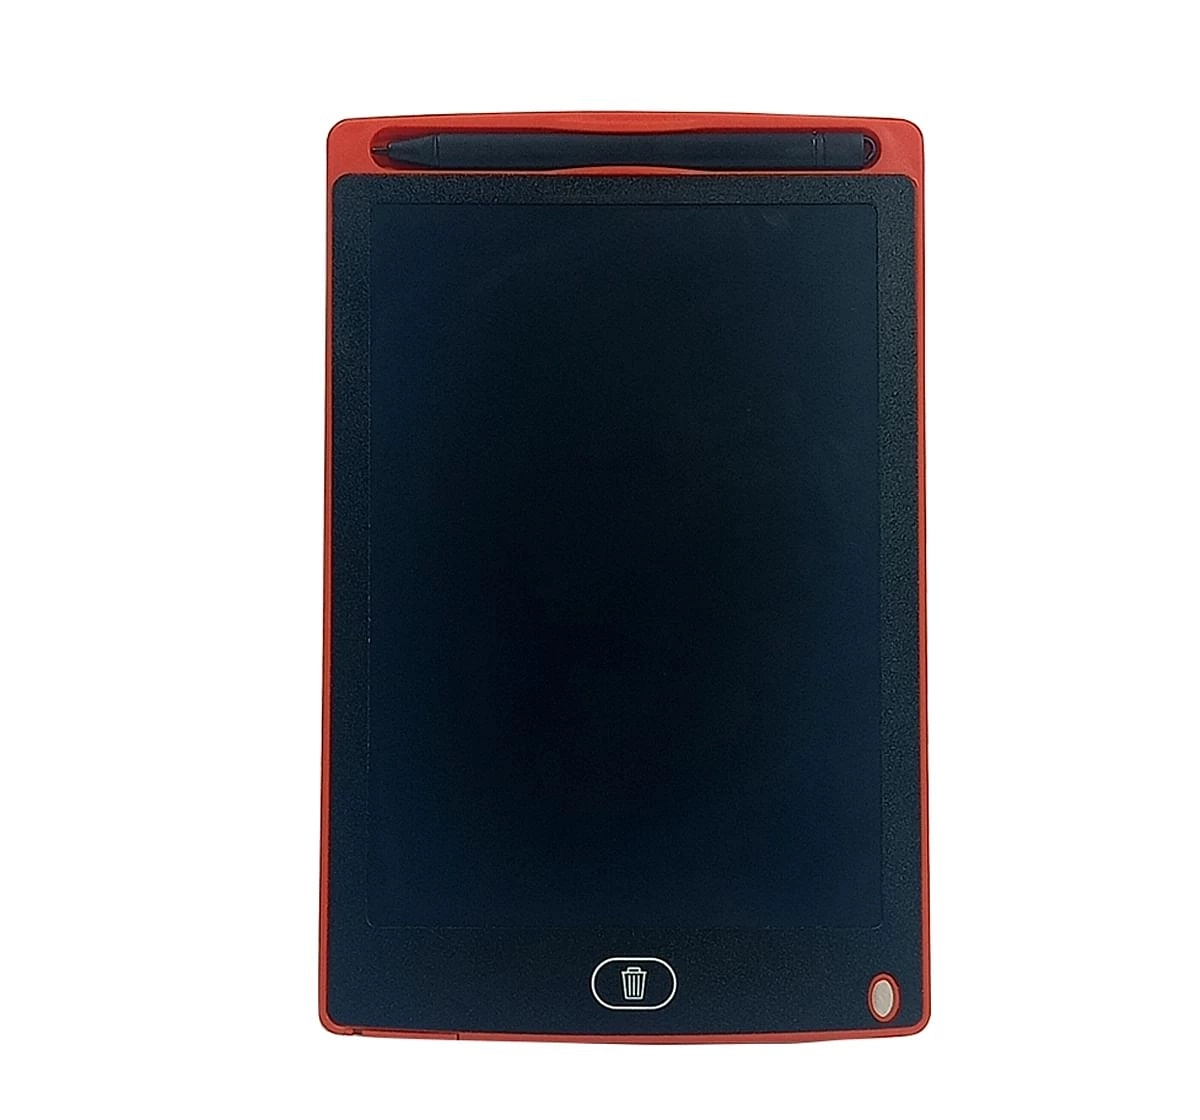 Sirius Toys LCD Tab 8.5cm Drawing Board for kids 4Y+, Red